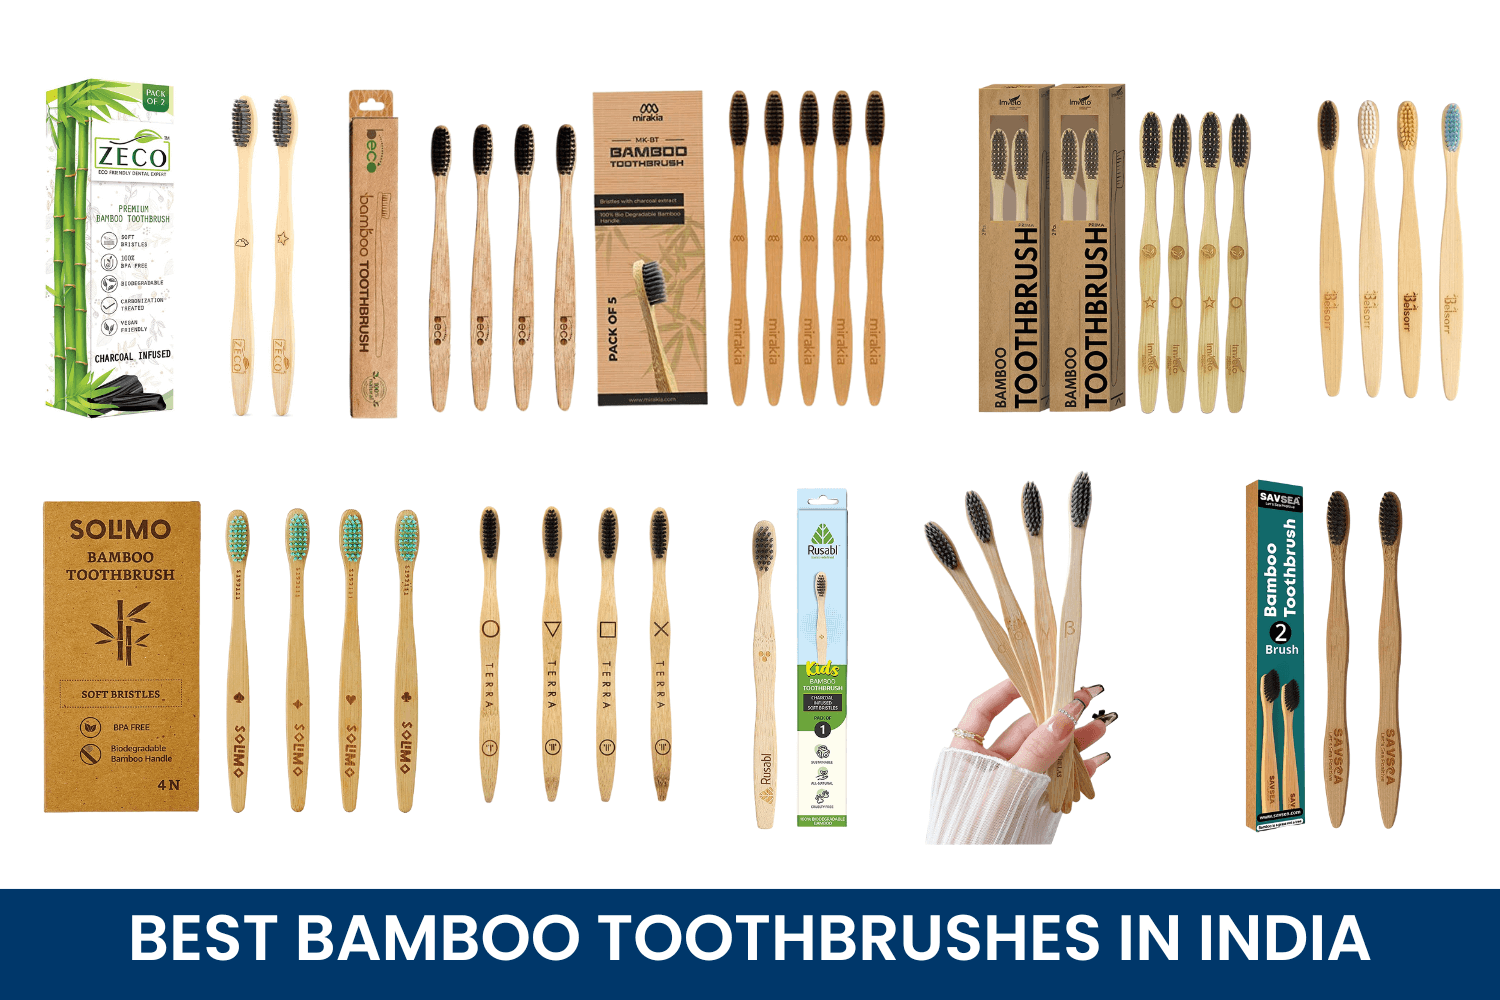 Best bamboo toothbrushes in India